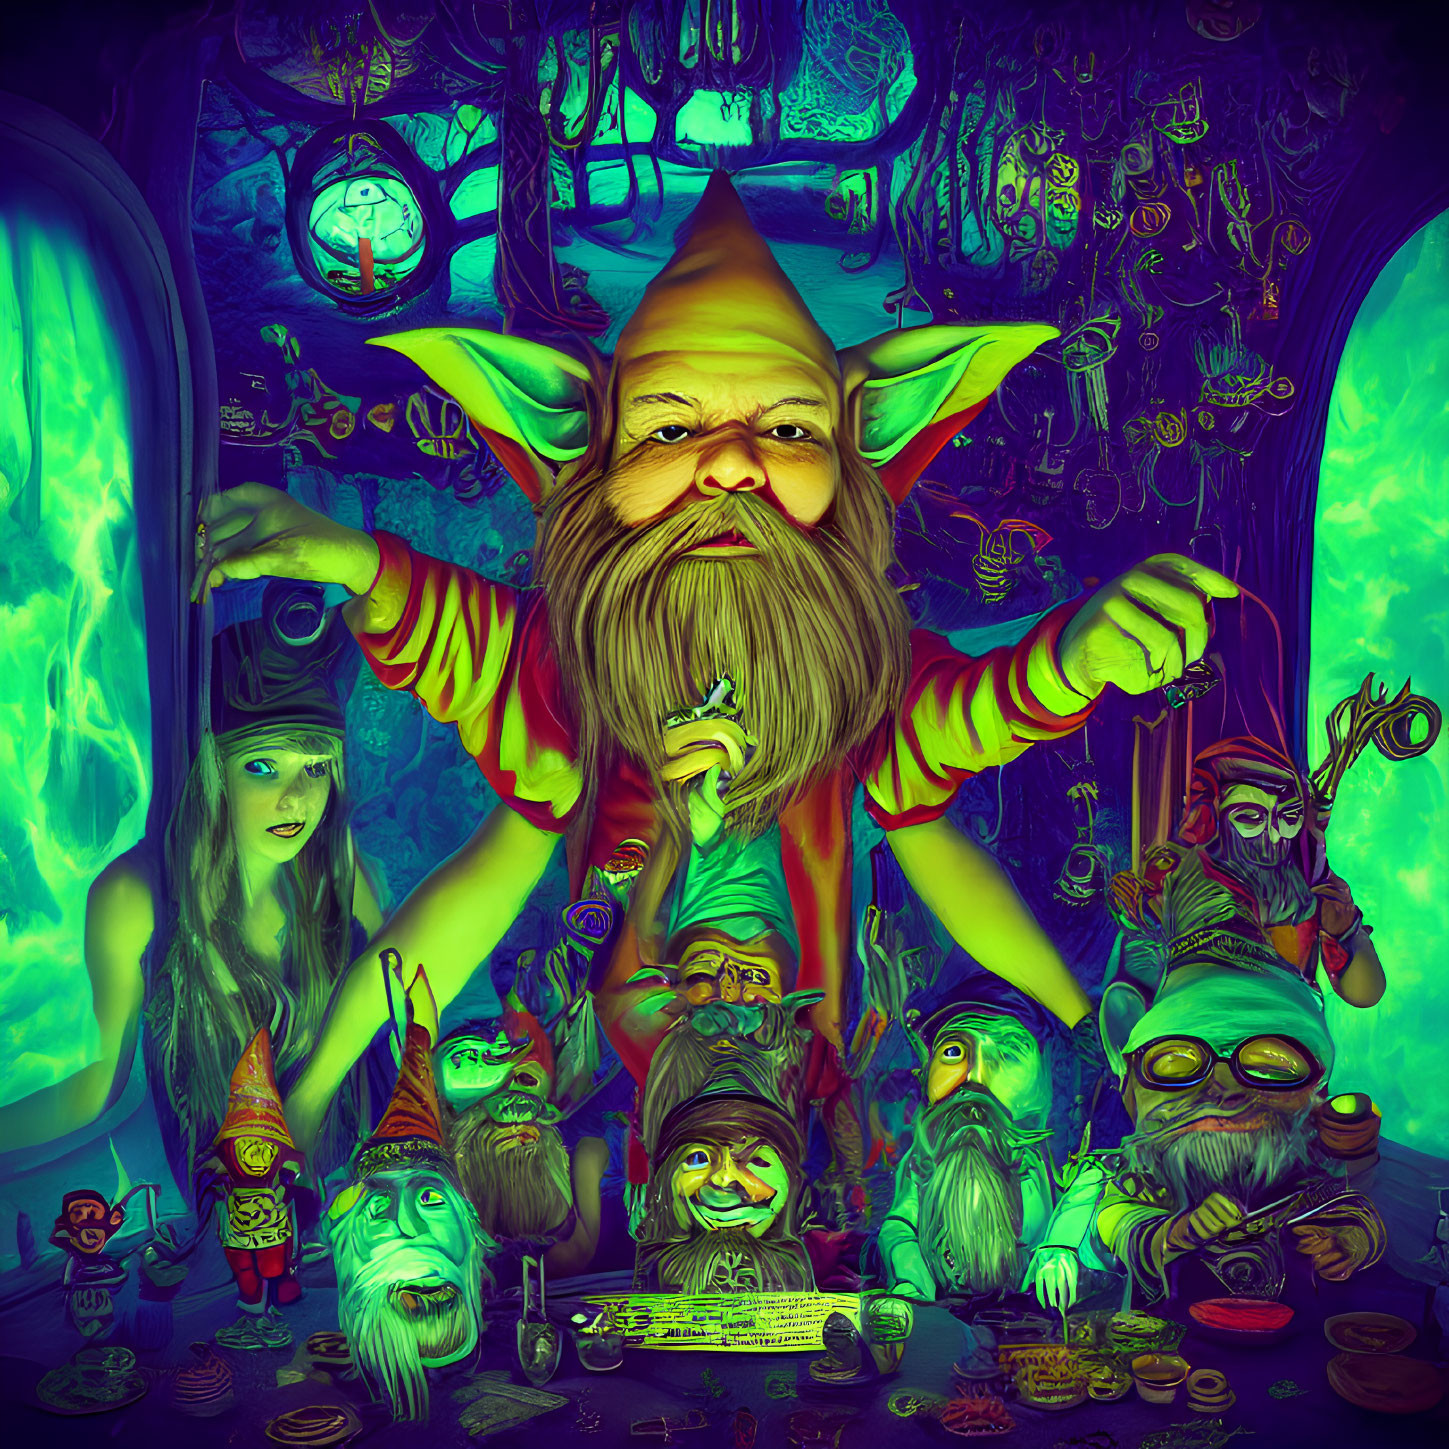 Colorful, Magical Workshop Scene with Elf and Intricate Details